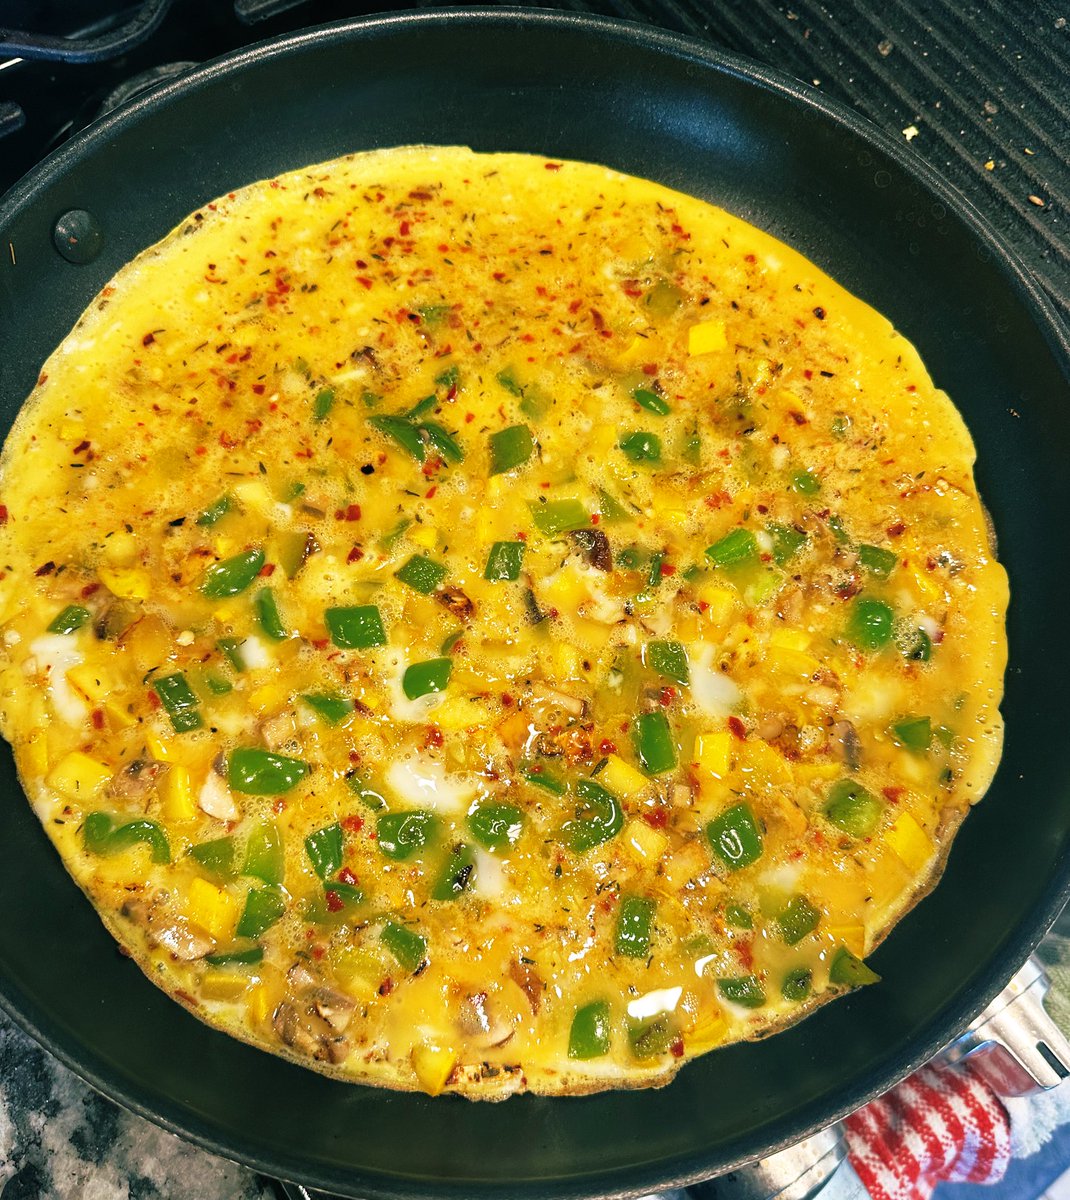 Does an omelet pretending to be a vegetable frittata count for Pie Day? 
Asking for a friend. 

#pieday #frittata #eggs #vegetables #omelet #Pied #summersquash #bellpepper #breakfast #Foodie #omelette #frittatas